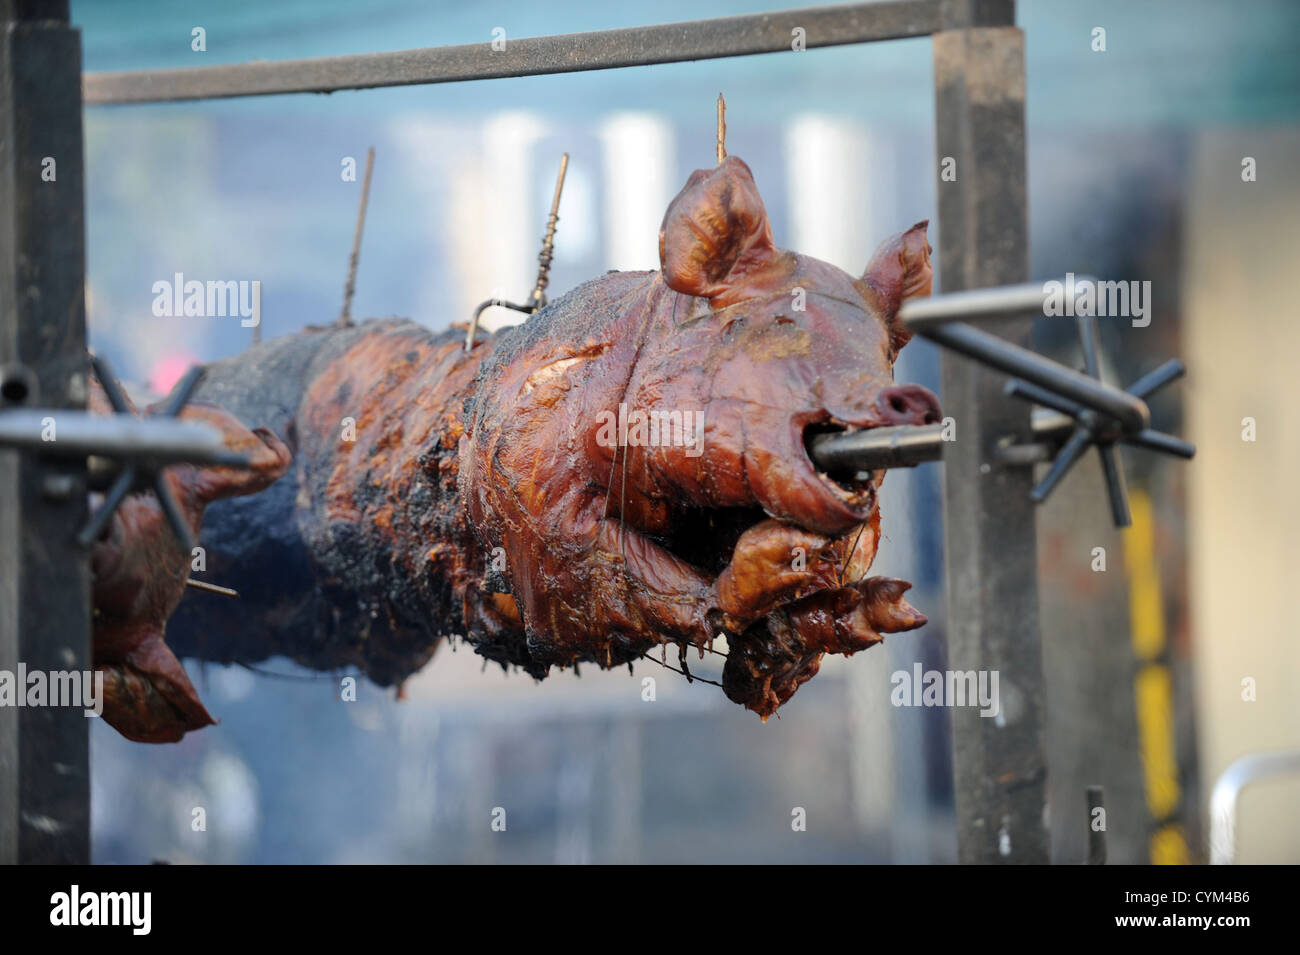 Hog Roast stall for the bonfire night celebrations in Lewes East Sussex UK Stock Photo